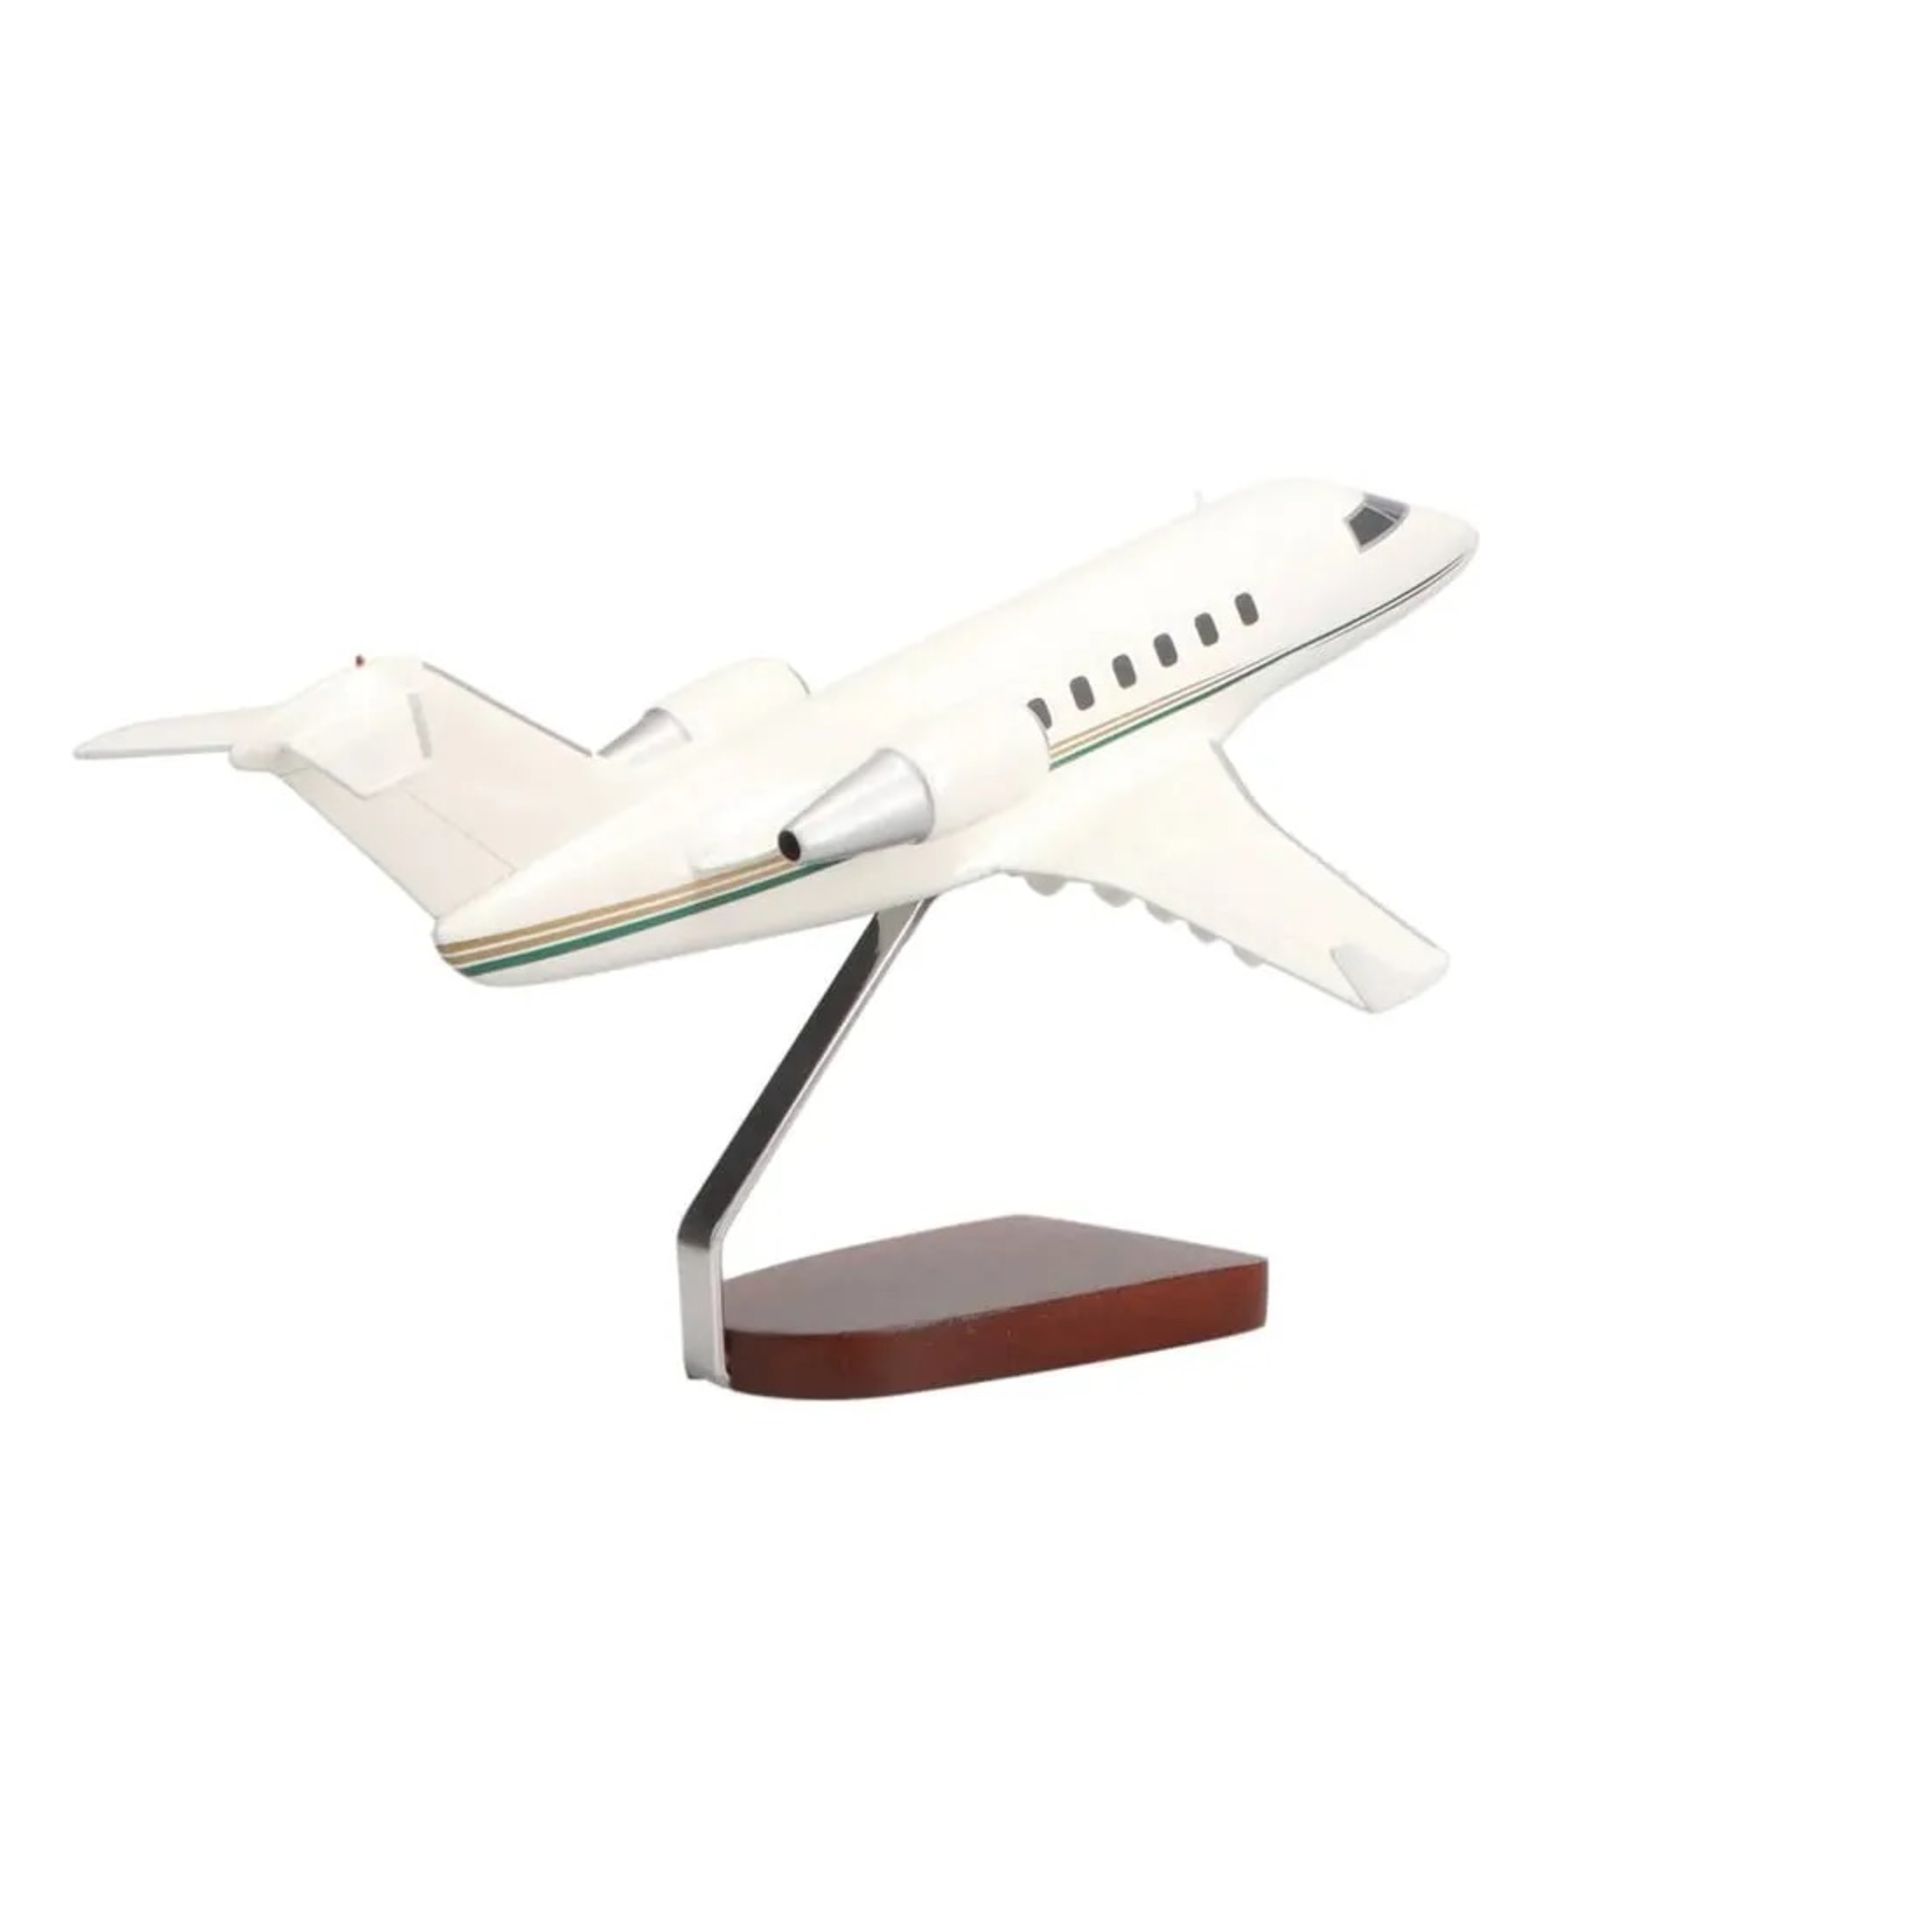 Bombardier Challenger 601 Scale Model - Image 2 of 4